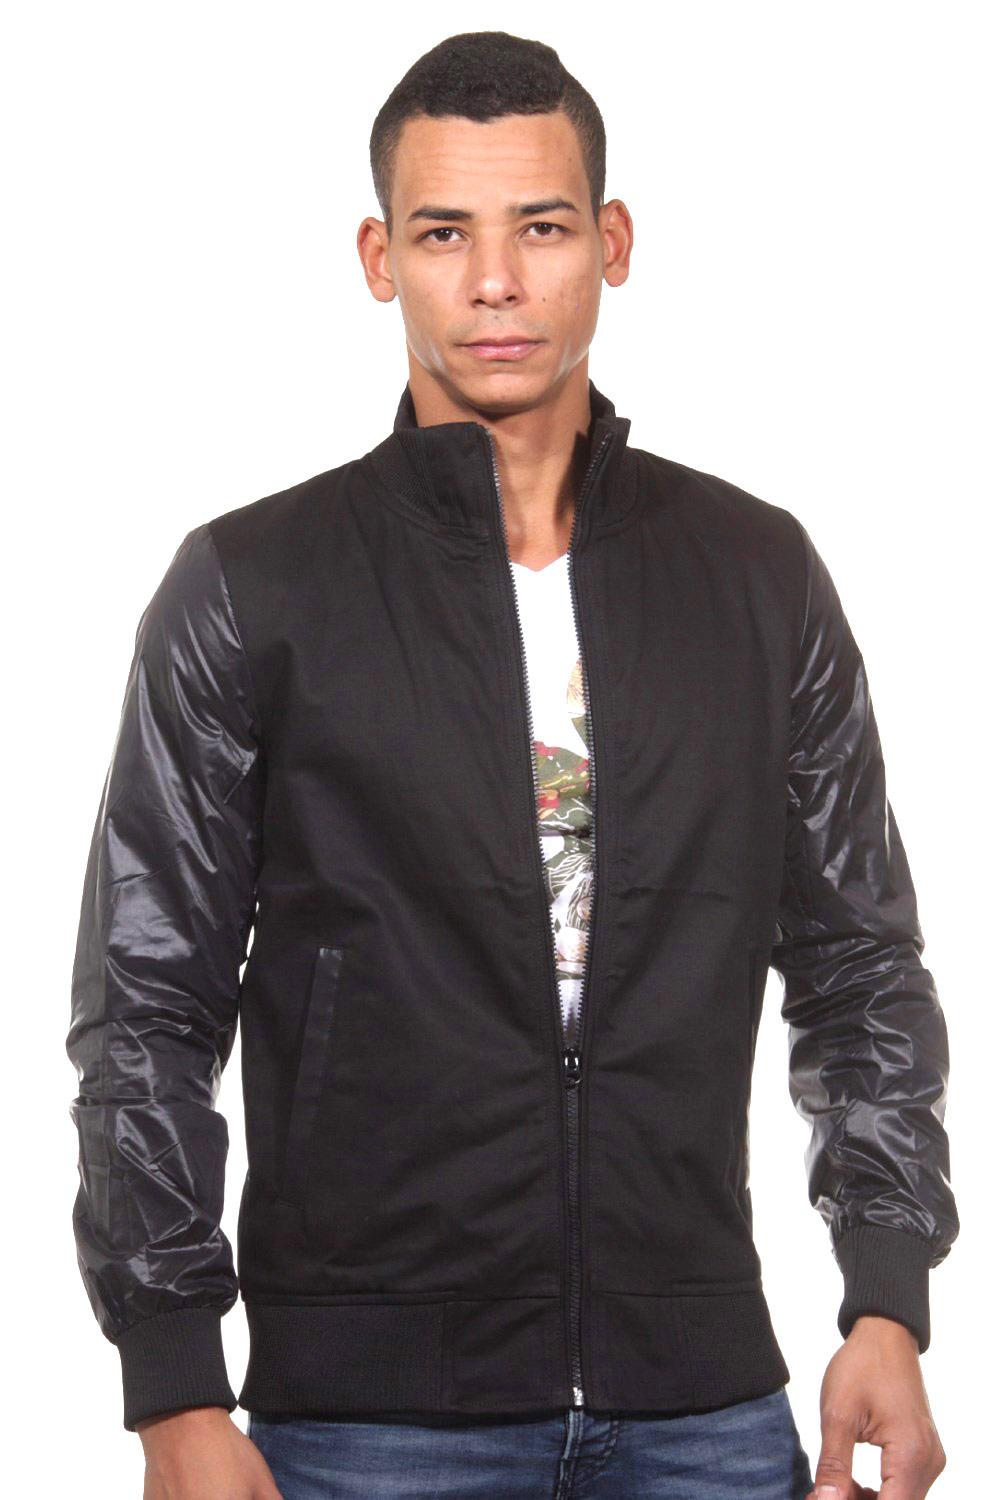 MARC*US jacket stand-up collar slim fit at oboy.com